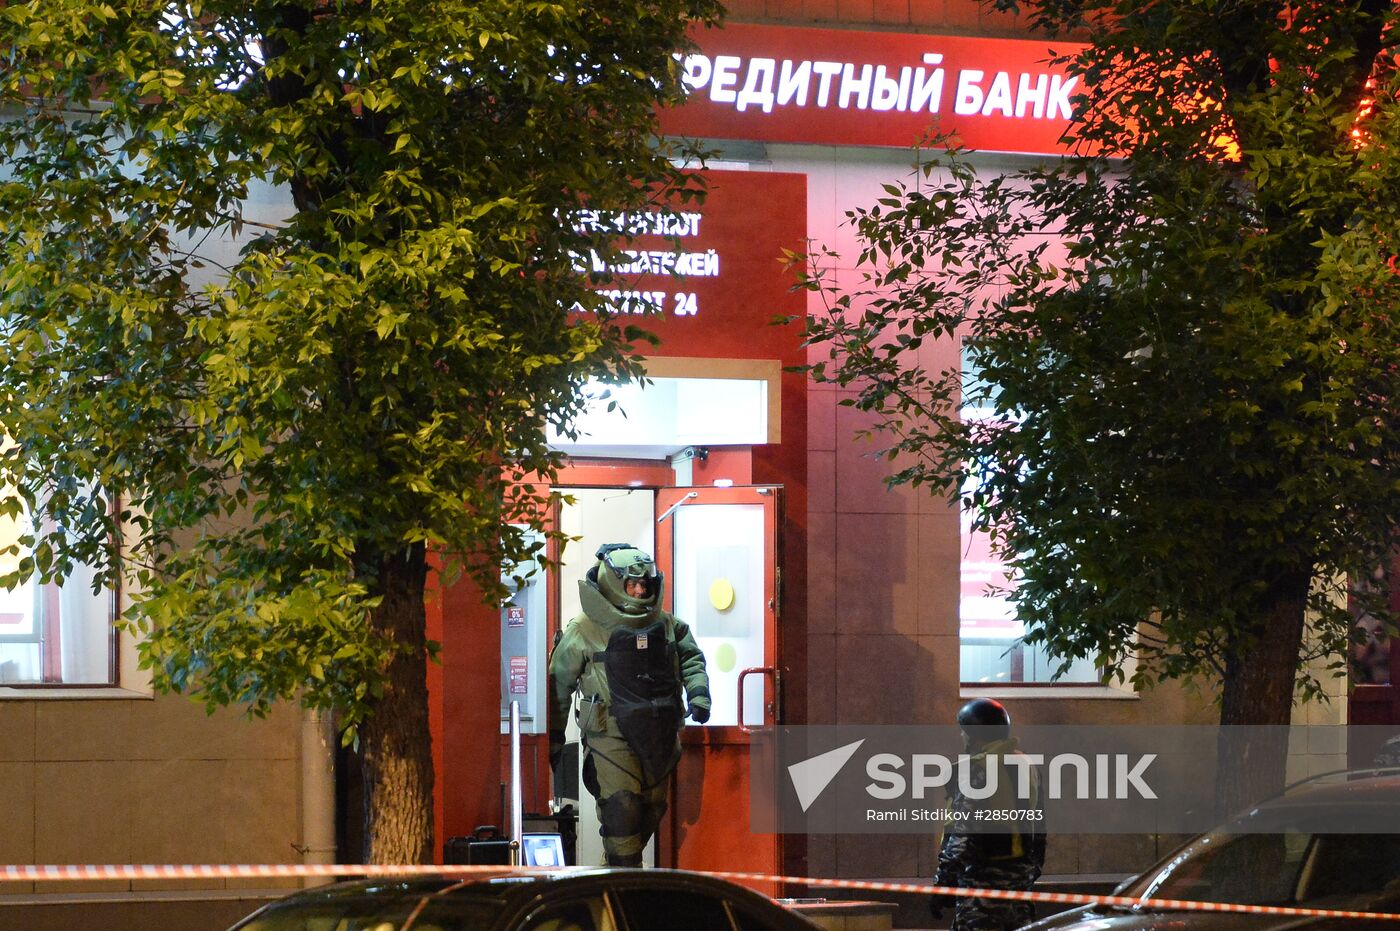 Bank robber killed after taking hostages in Moscow